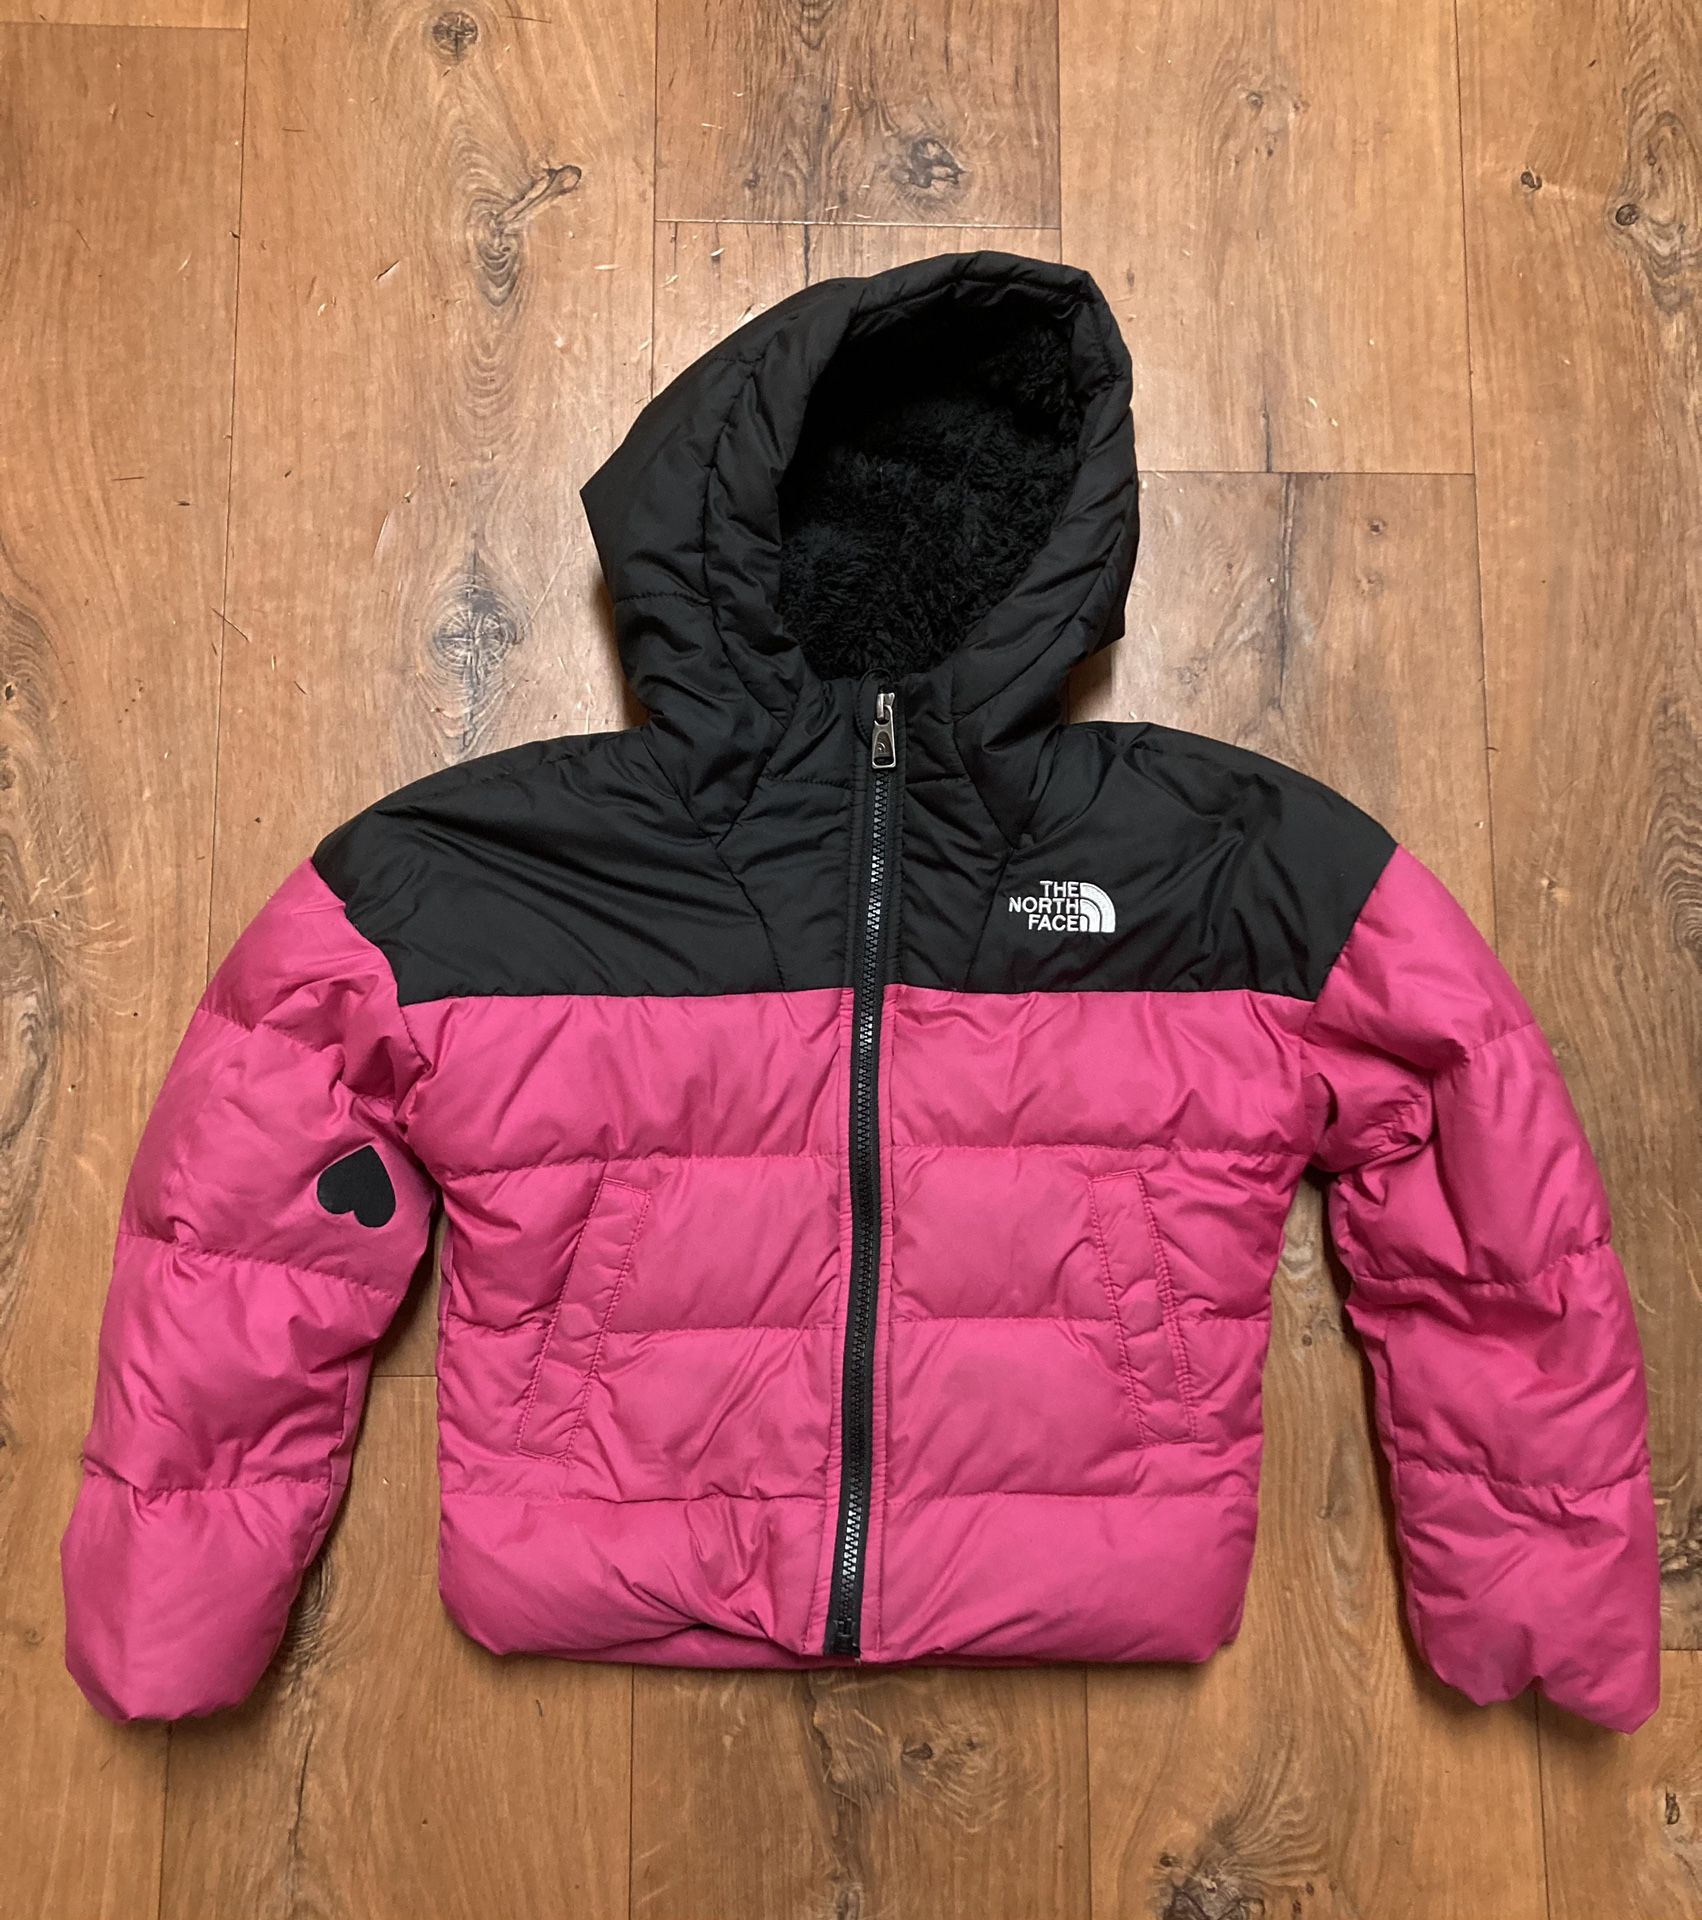 THE NORTH FACE Girl’s Childrens 550 Down Puffer Coat Jacket Size XS 6 Pink/Black Hoodie Full Zip Sherpa Lining